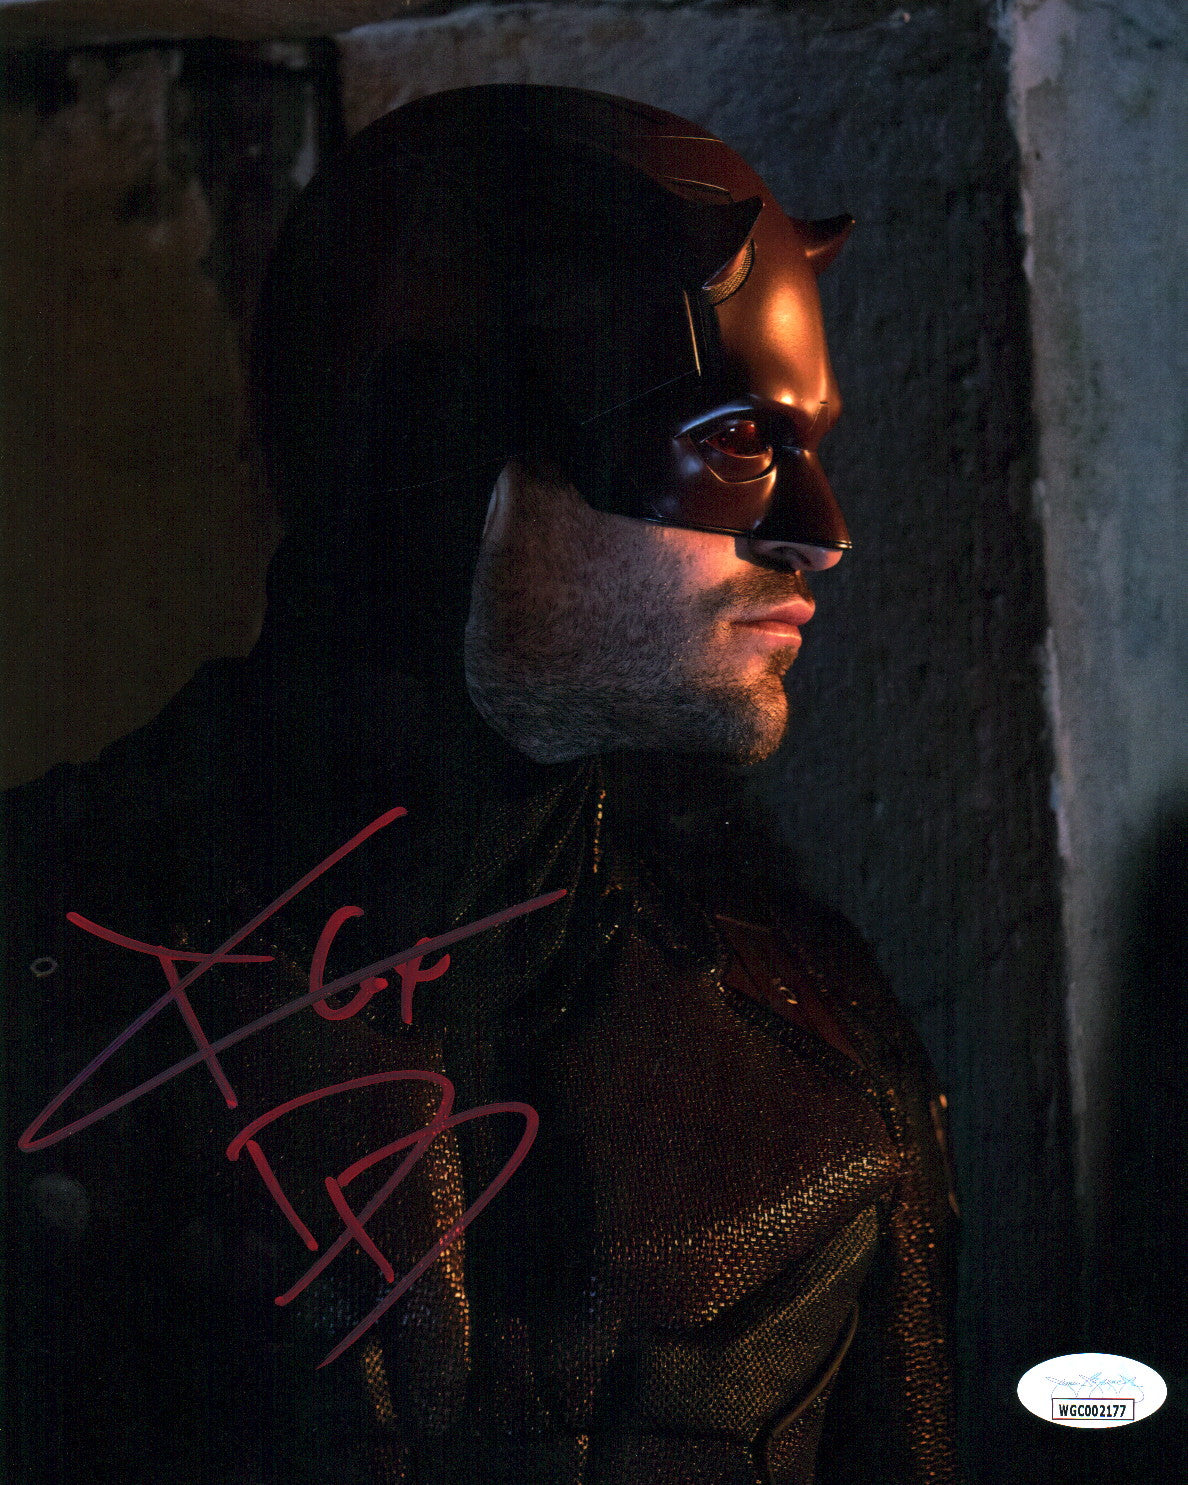 Charlie Cox Daredevil 8x10 Signed Photo JSA Certified Autograph GalaxyCon